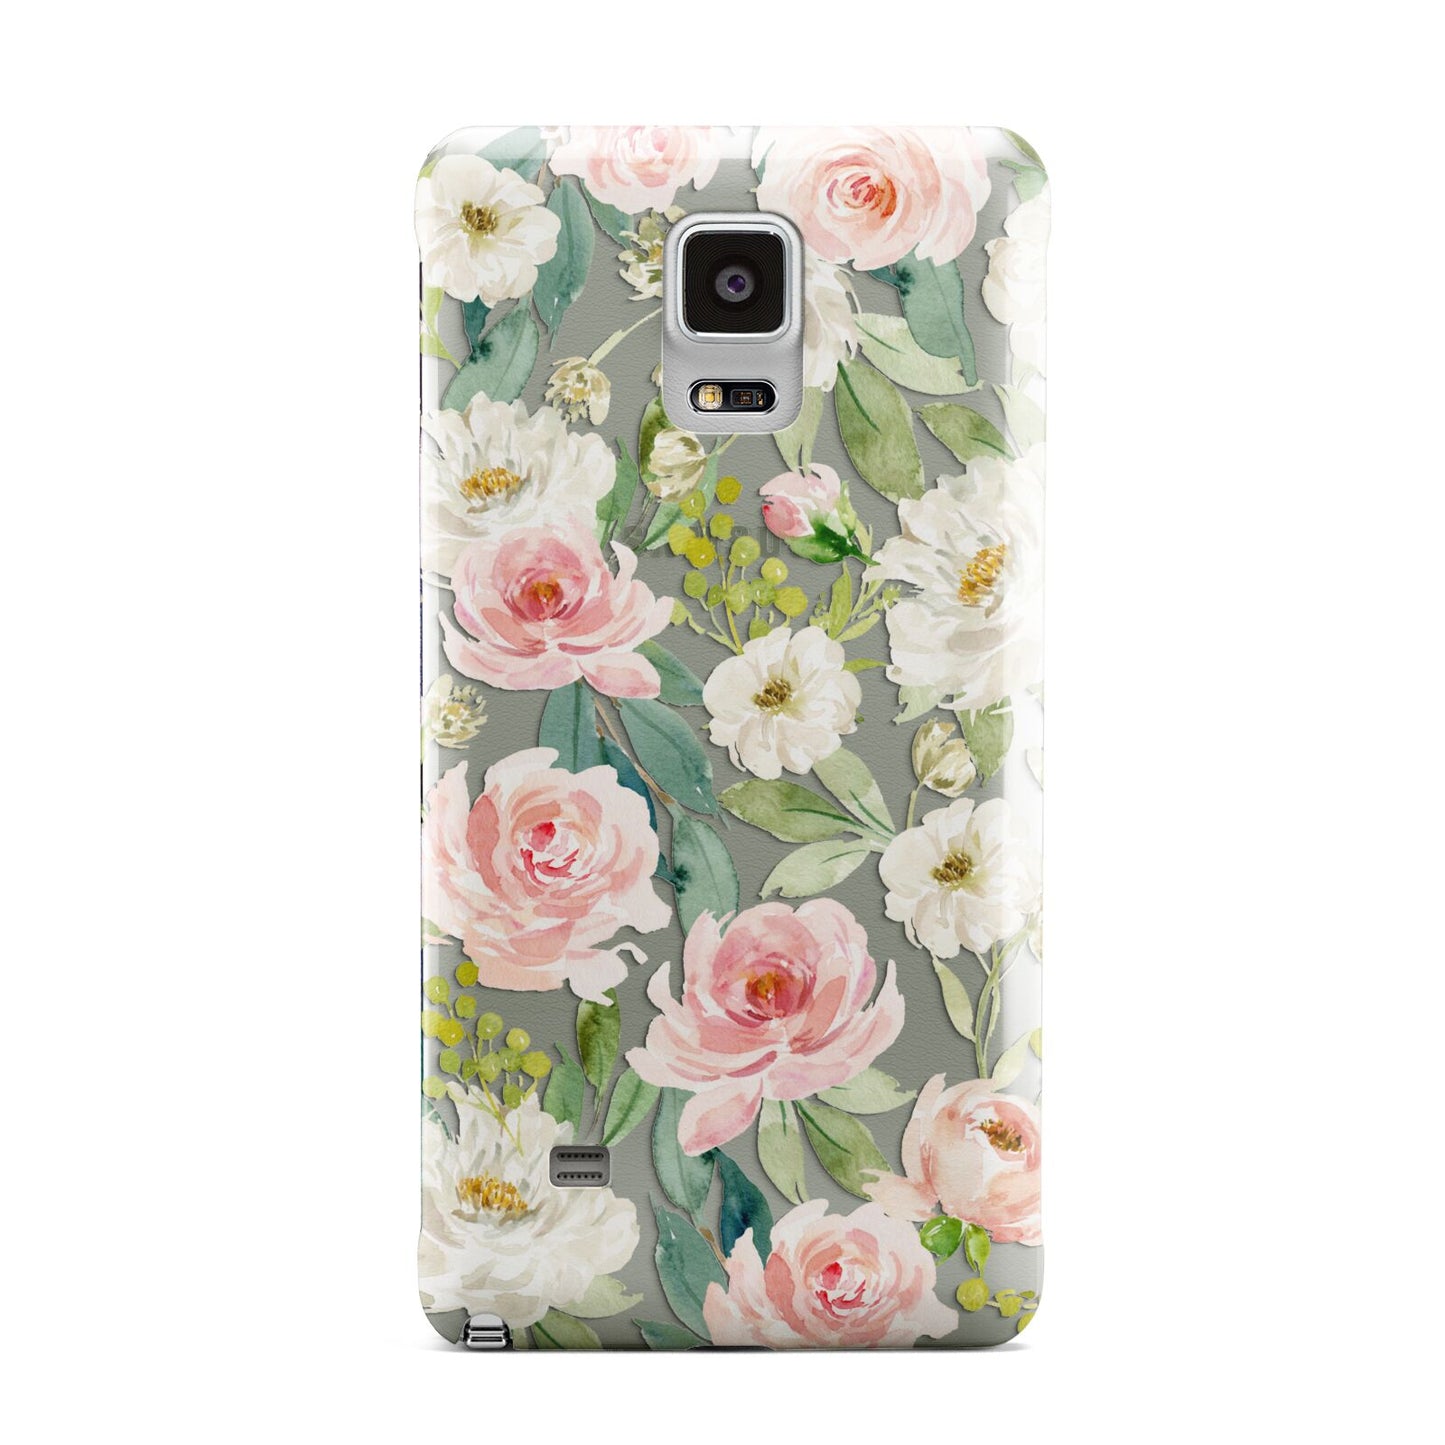 Watercolour Peonies Roses and Foliage Samsung Galaxy Note 4 Case